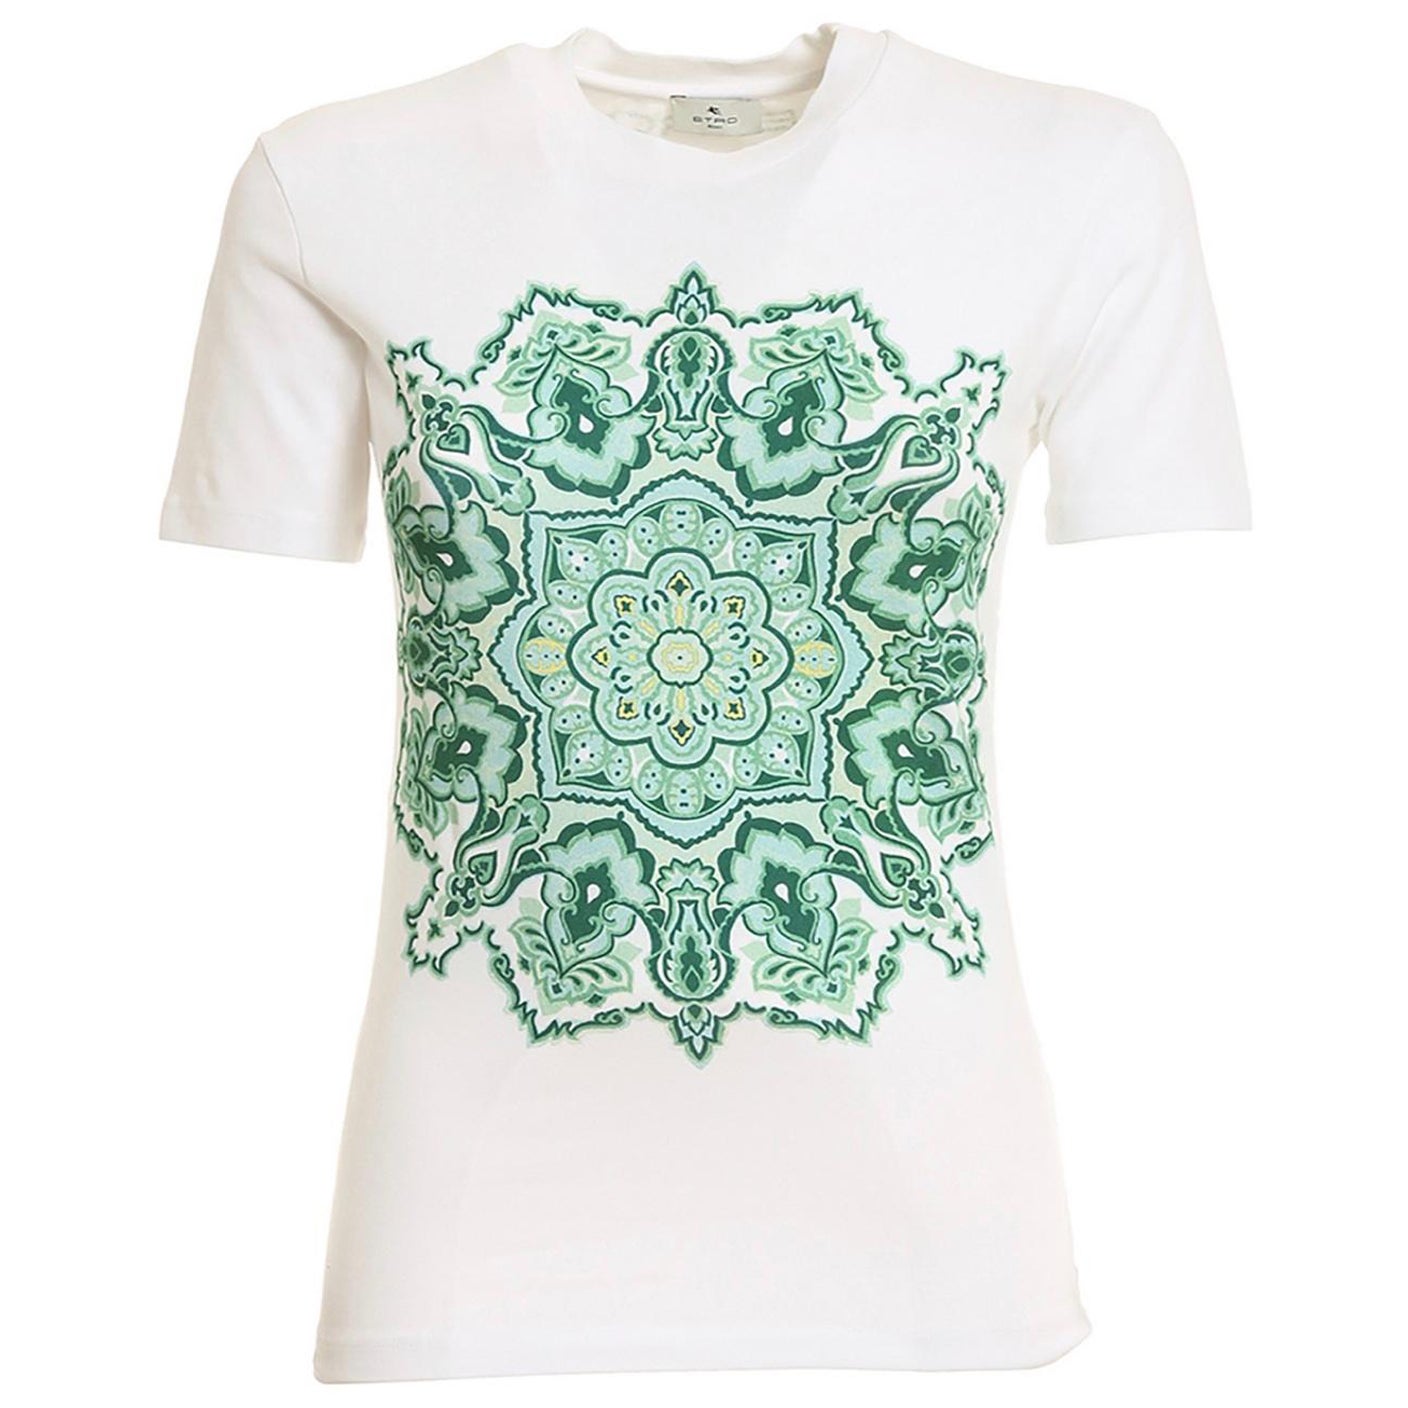 Etro Green Mandala Print Graphic T-Shirt Size S NWT For Sale